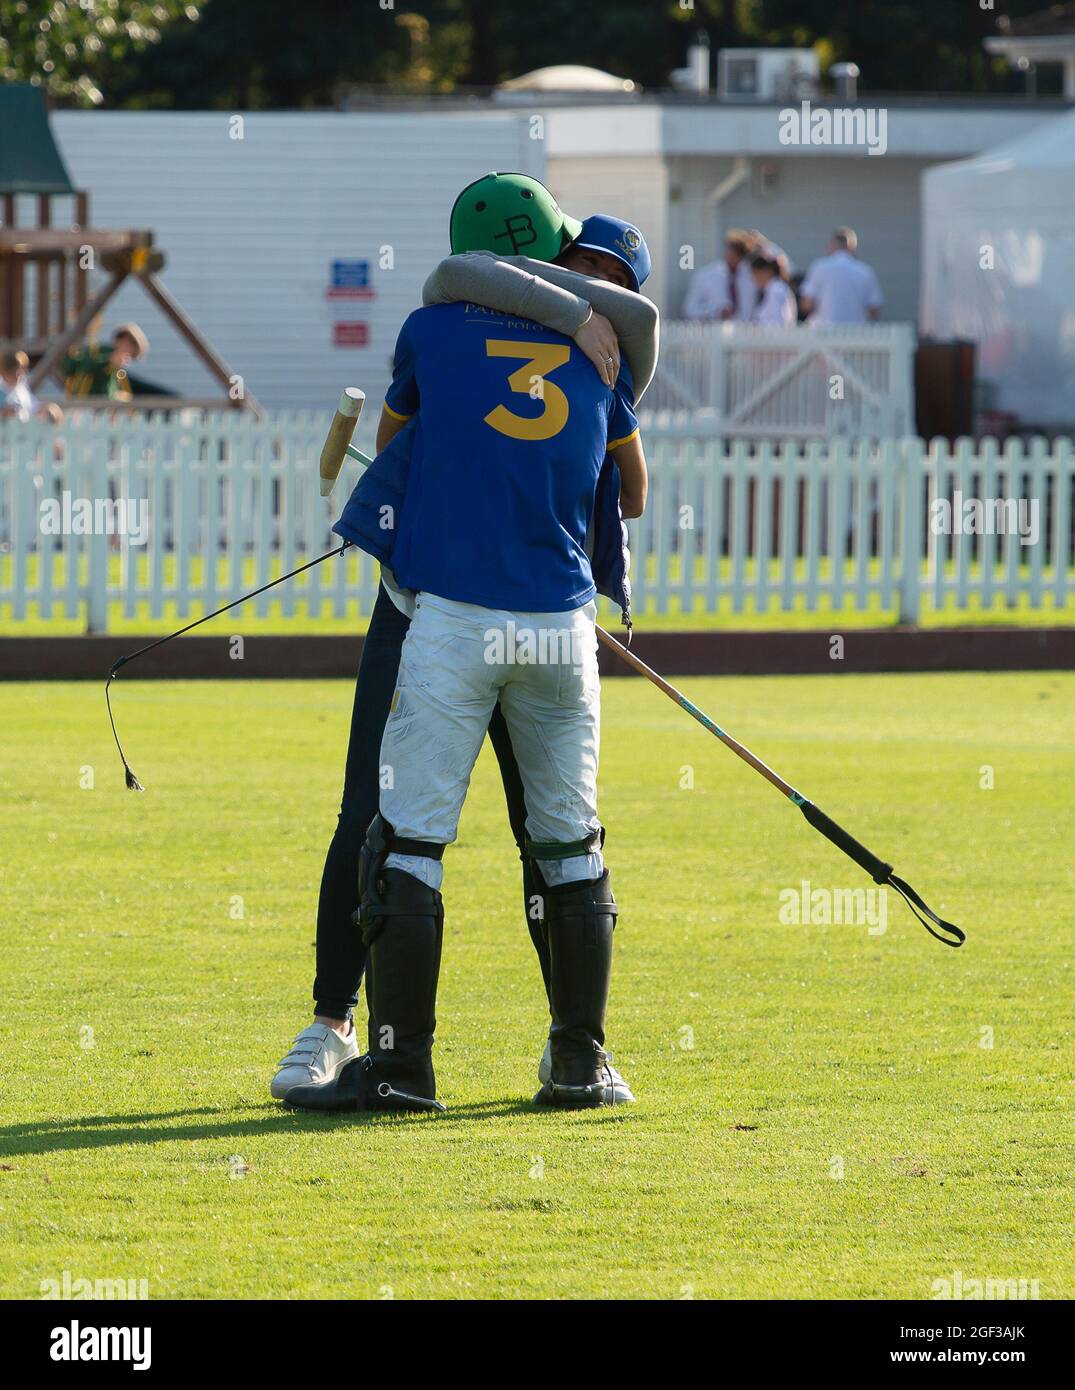 Egham, Surrey, UK. 22nd August, 2021. Park Place polo players were delighted to win the Prince of Wales's Championship Cup. Credit: Maureen McLean/Alamy Stock Photo